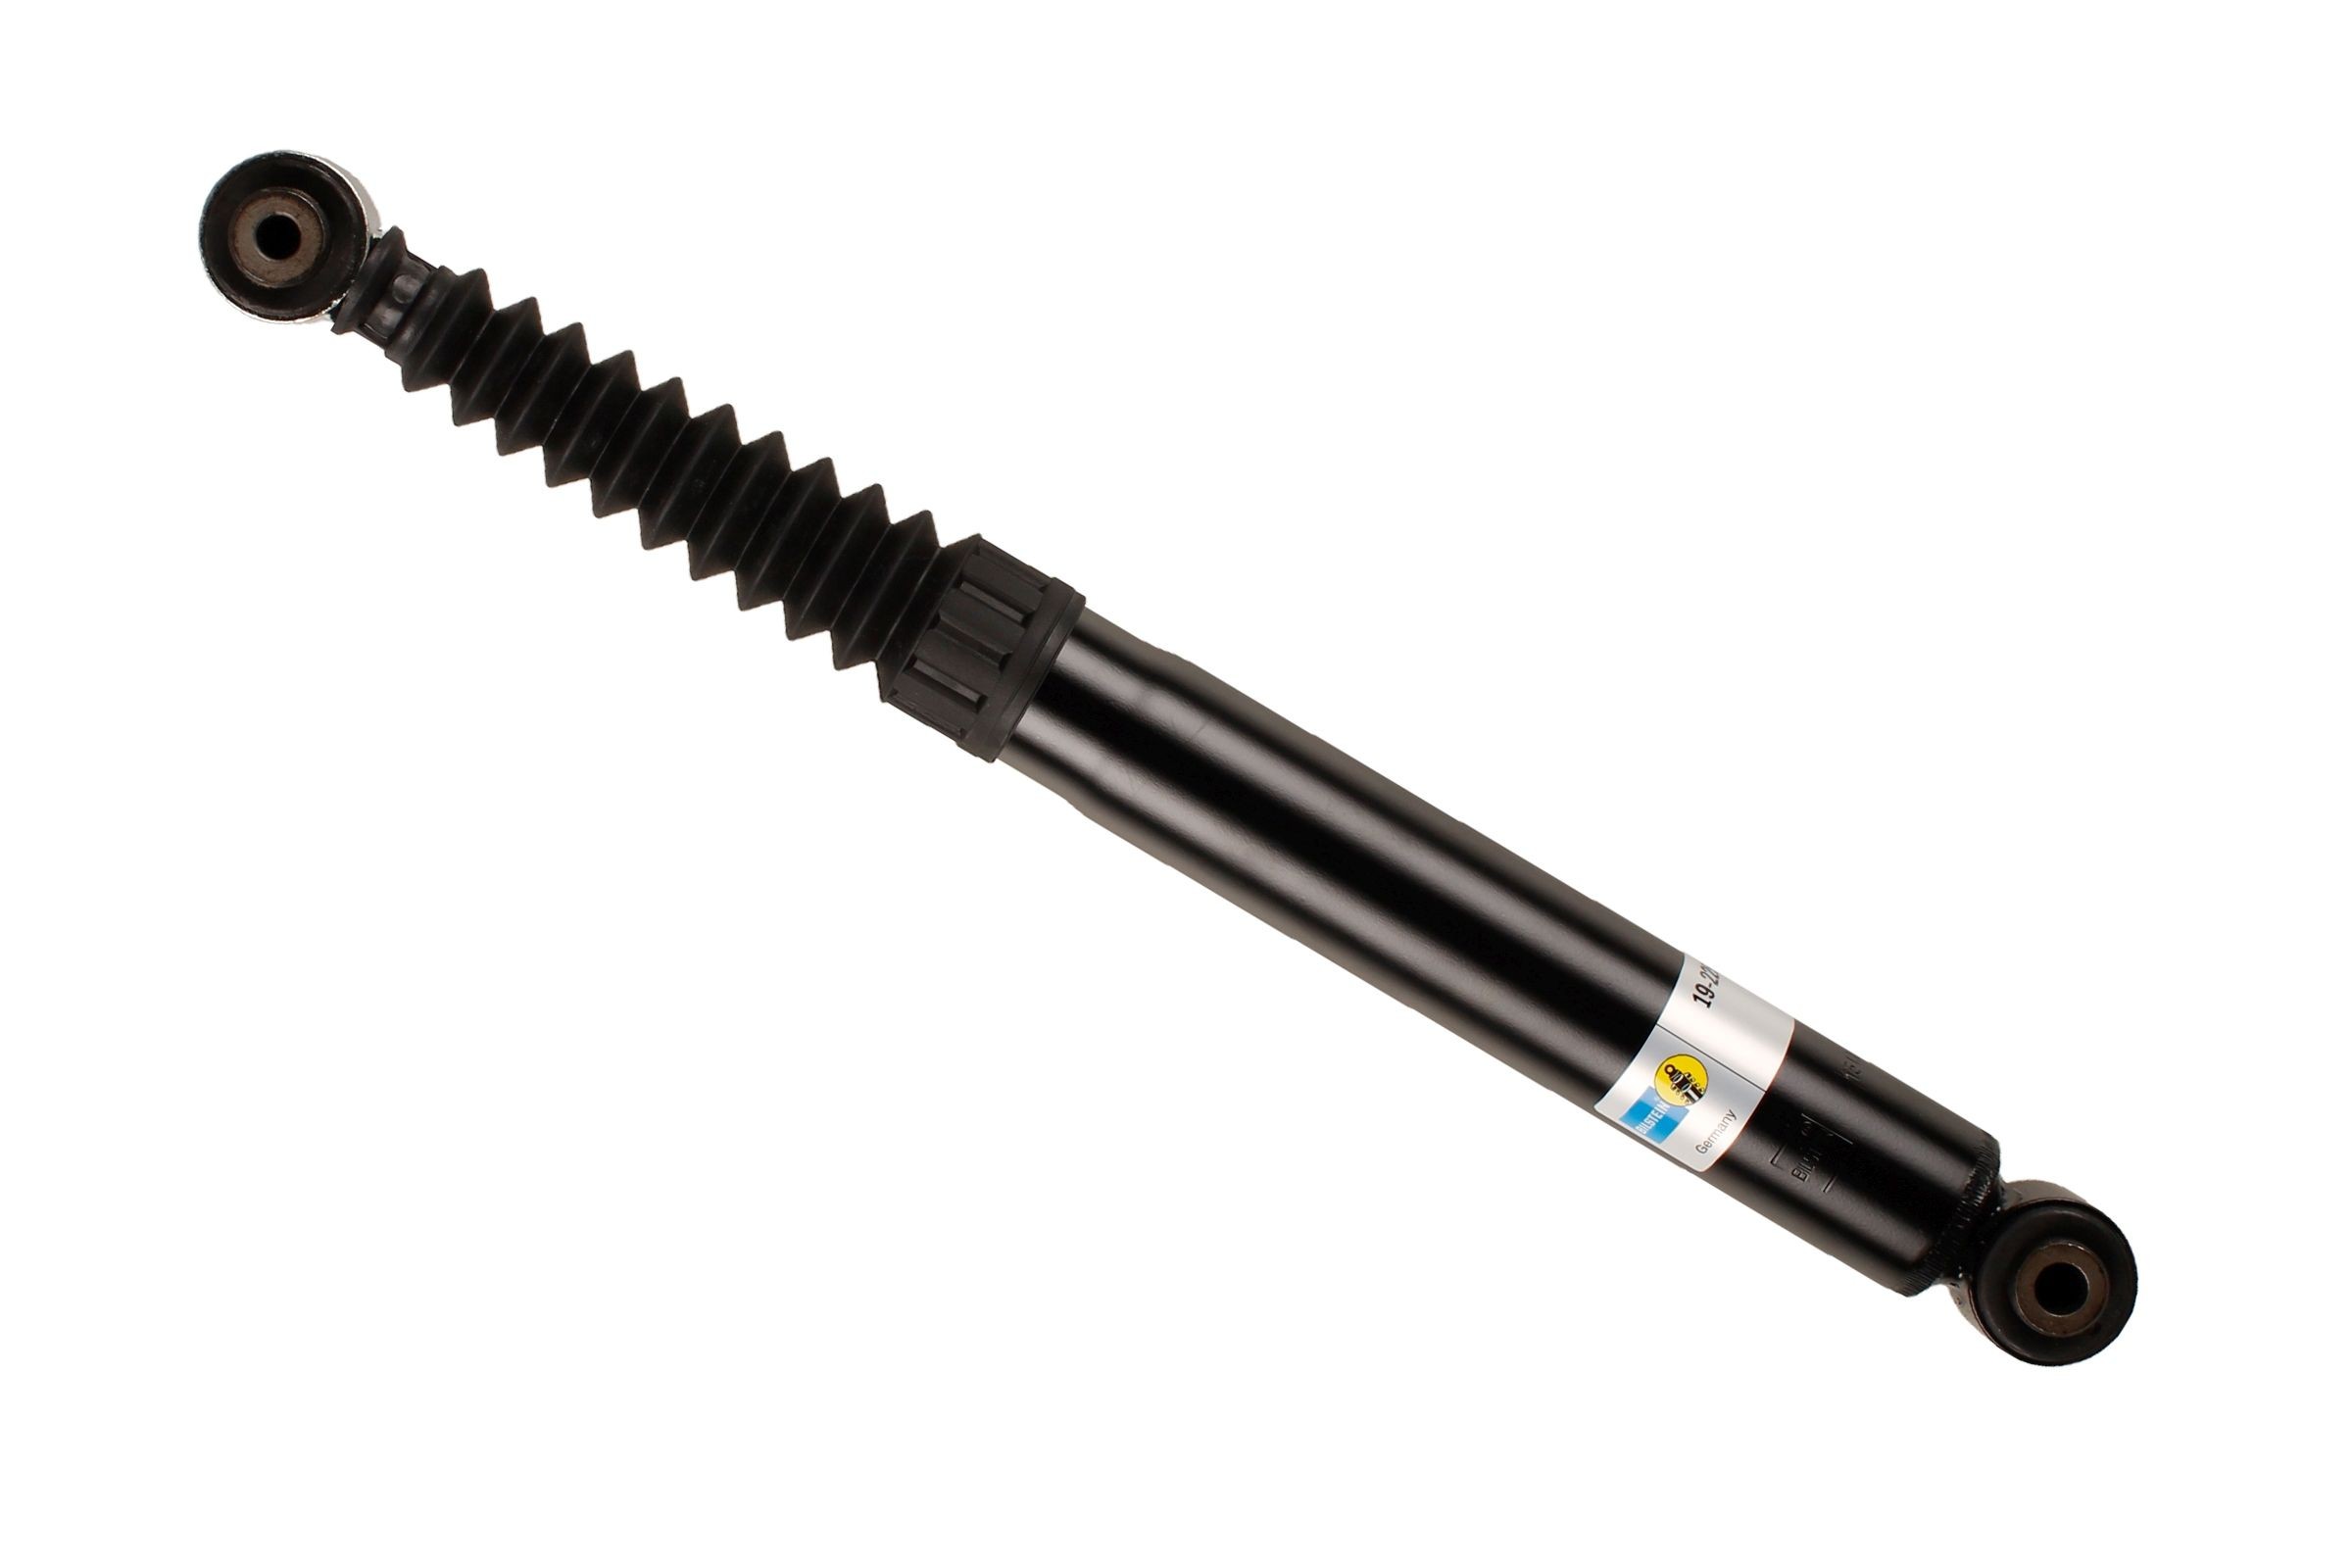 BILSTEIN - B4 OE Replacement Rear Axle, Gas Pressure, Twin-Tube, Absorber does not carry a spring, Top eye, Bottom eye Shocks 19-225234 buy